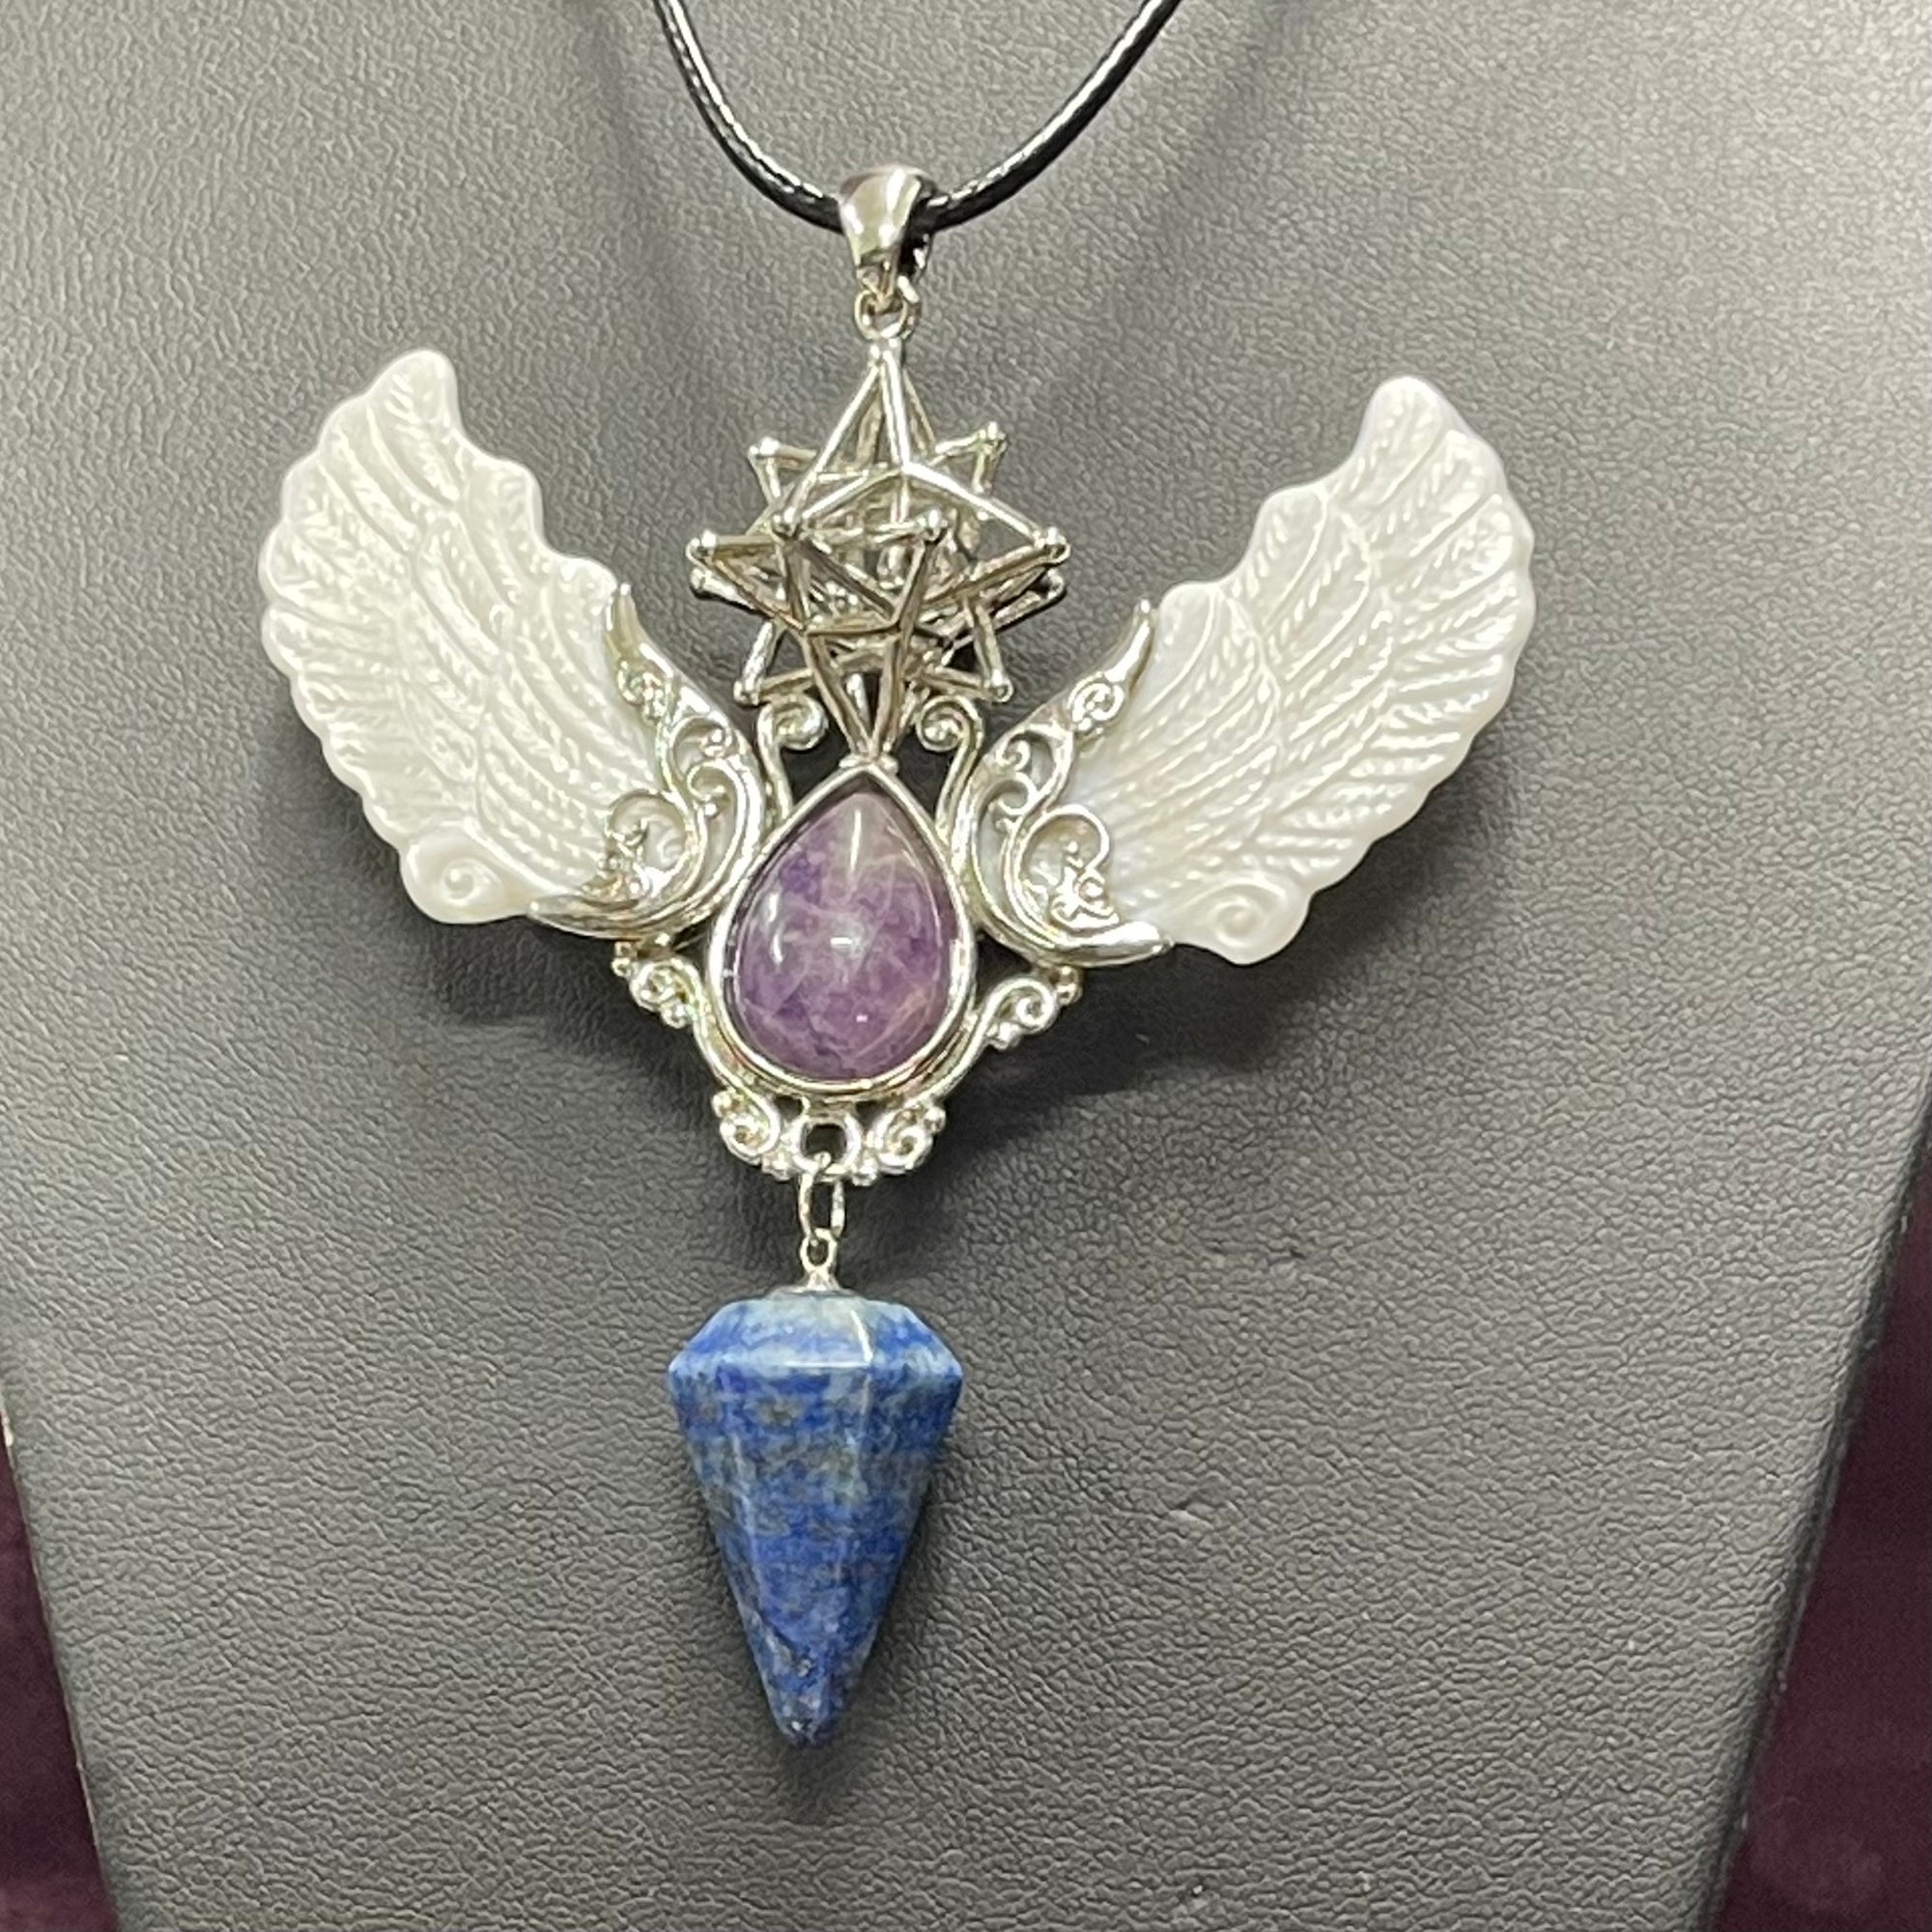 Alloy Carved Wing Pendant - Amethyst & Lapis Lazuli